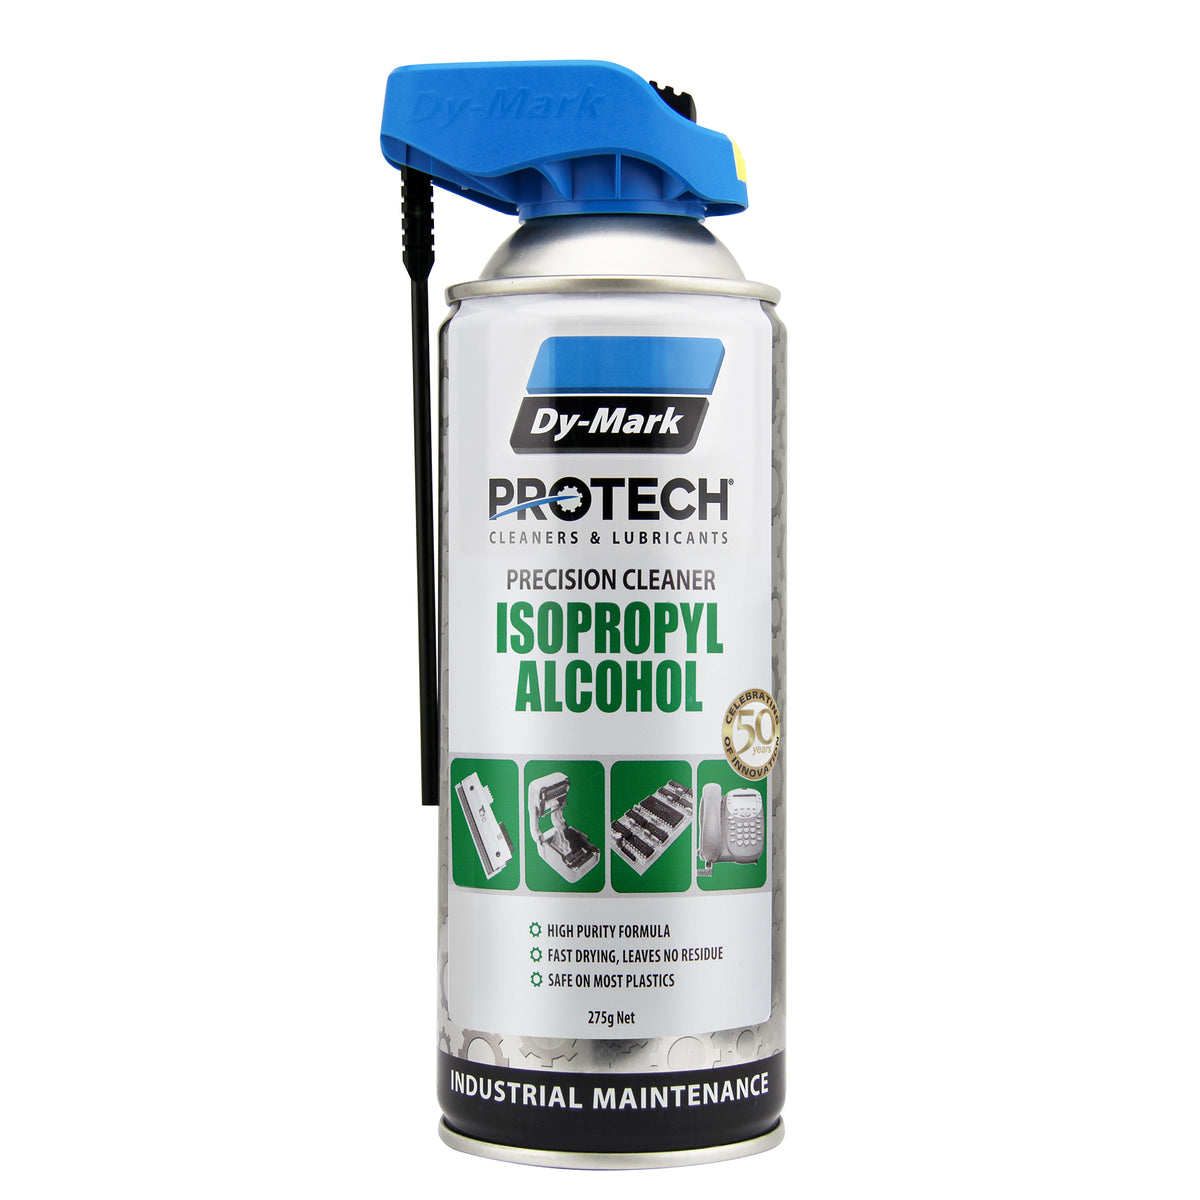 Protech Isopropyl Alcohol Precision Cleaner - Aerosol 275g